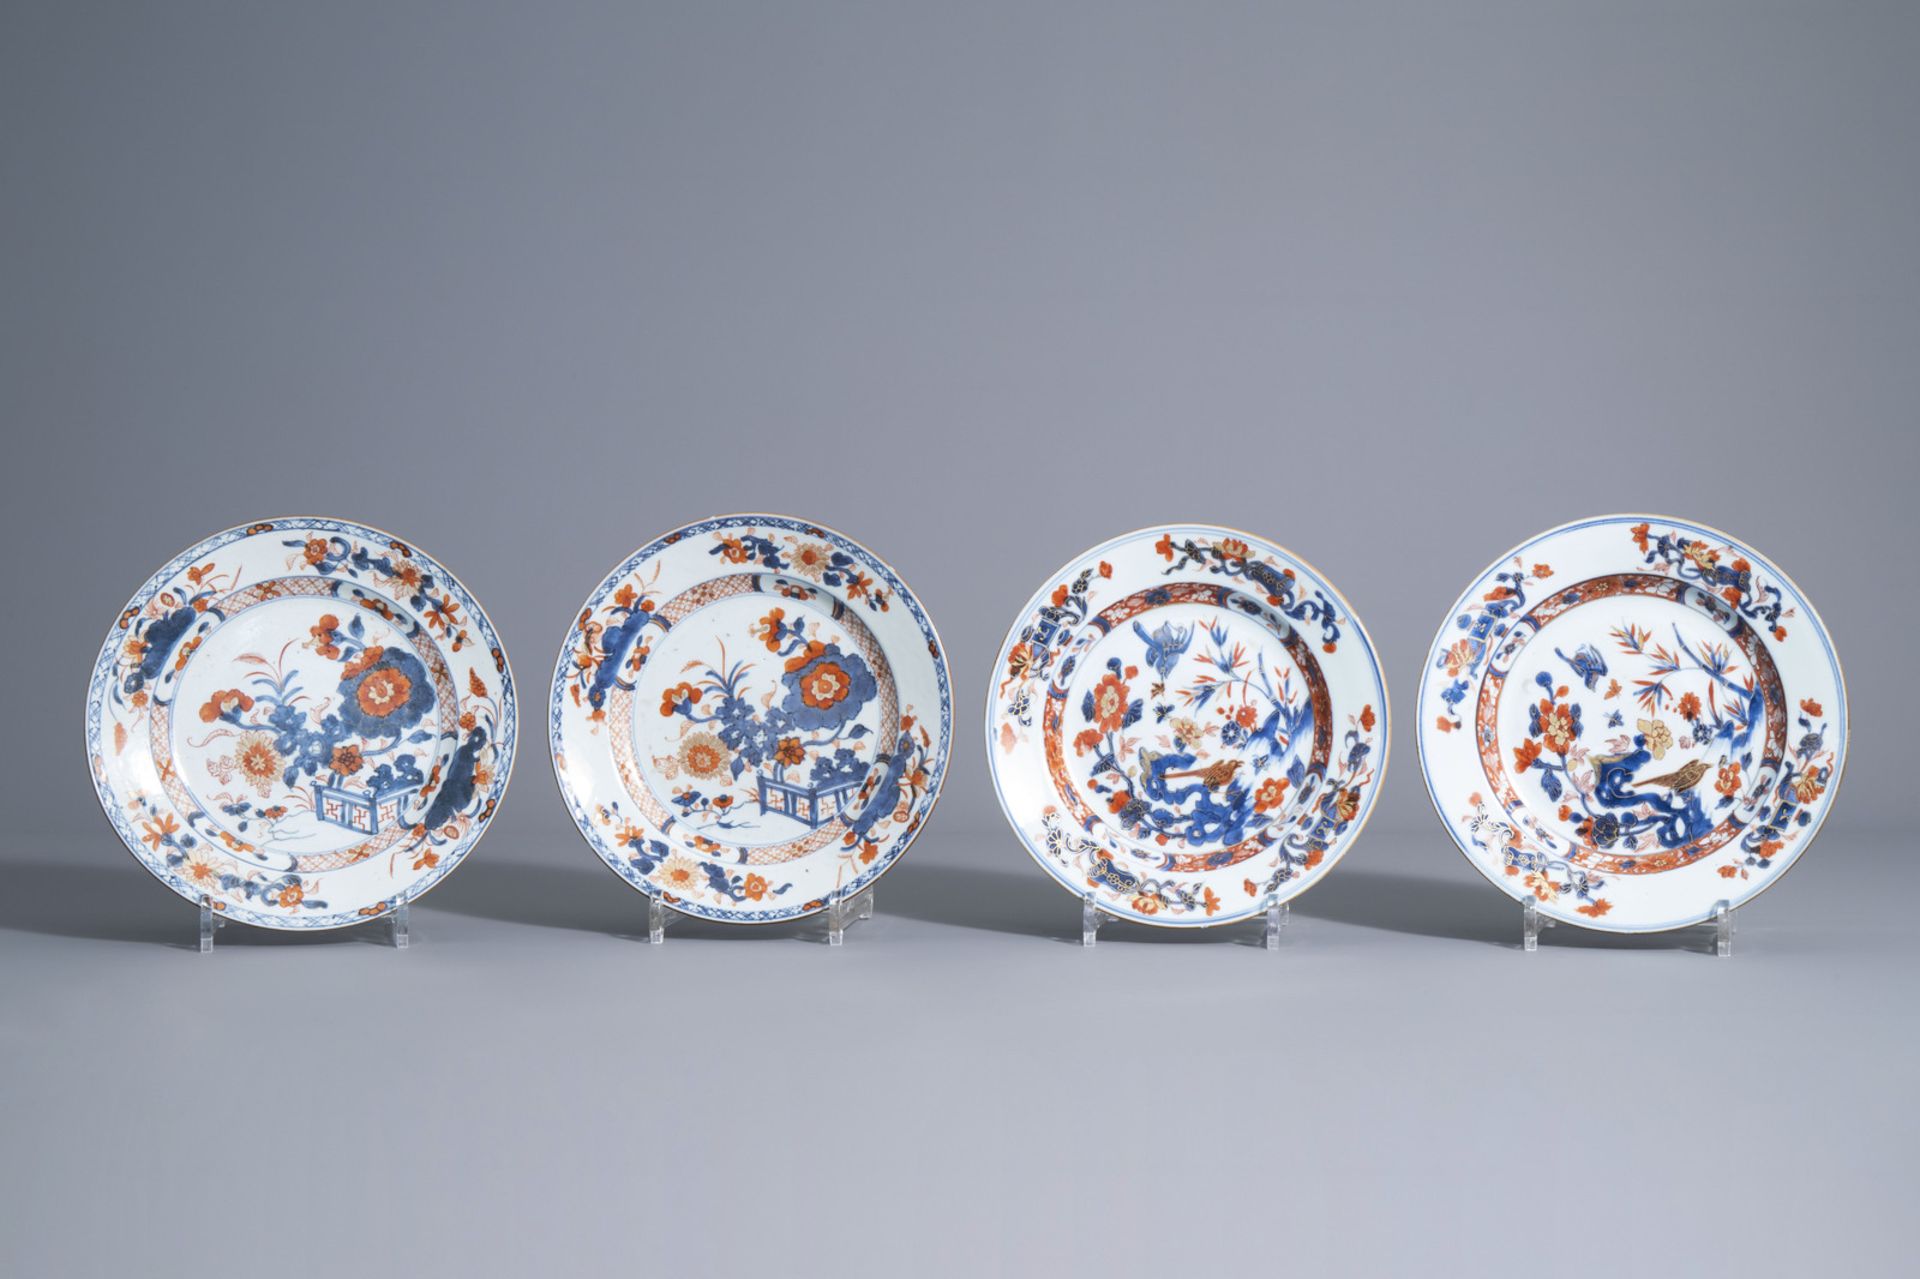 Two pairs of Chinese Imari style plates with floral design, Kangxi